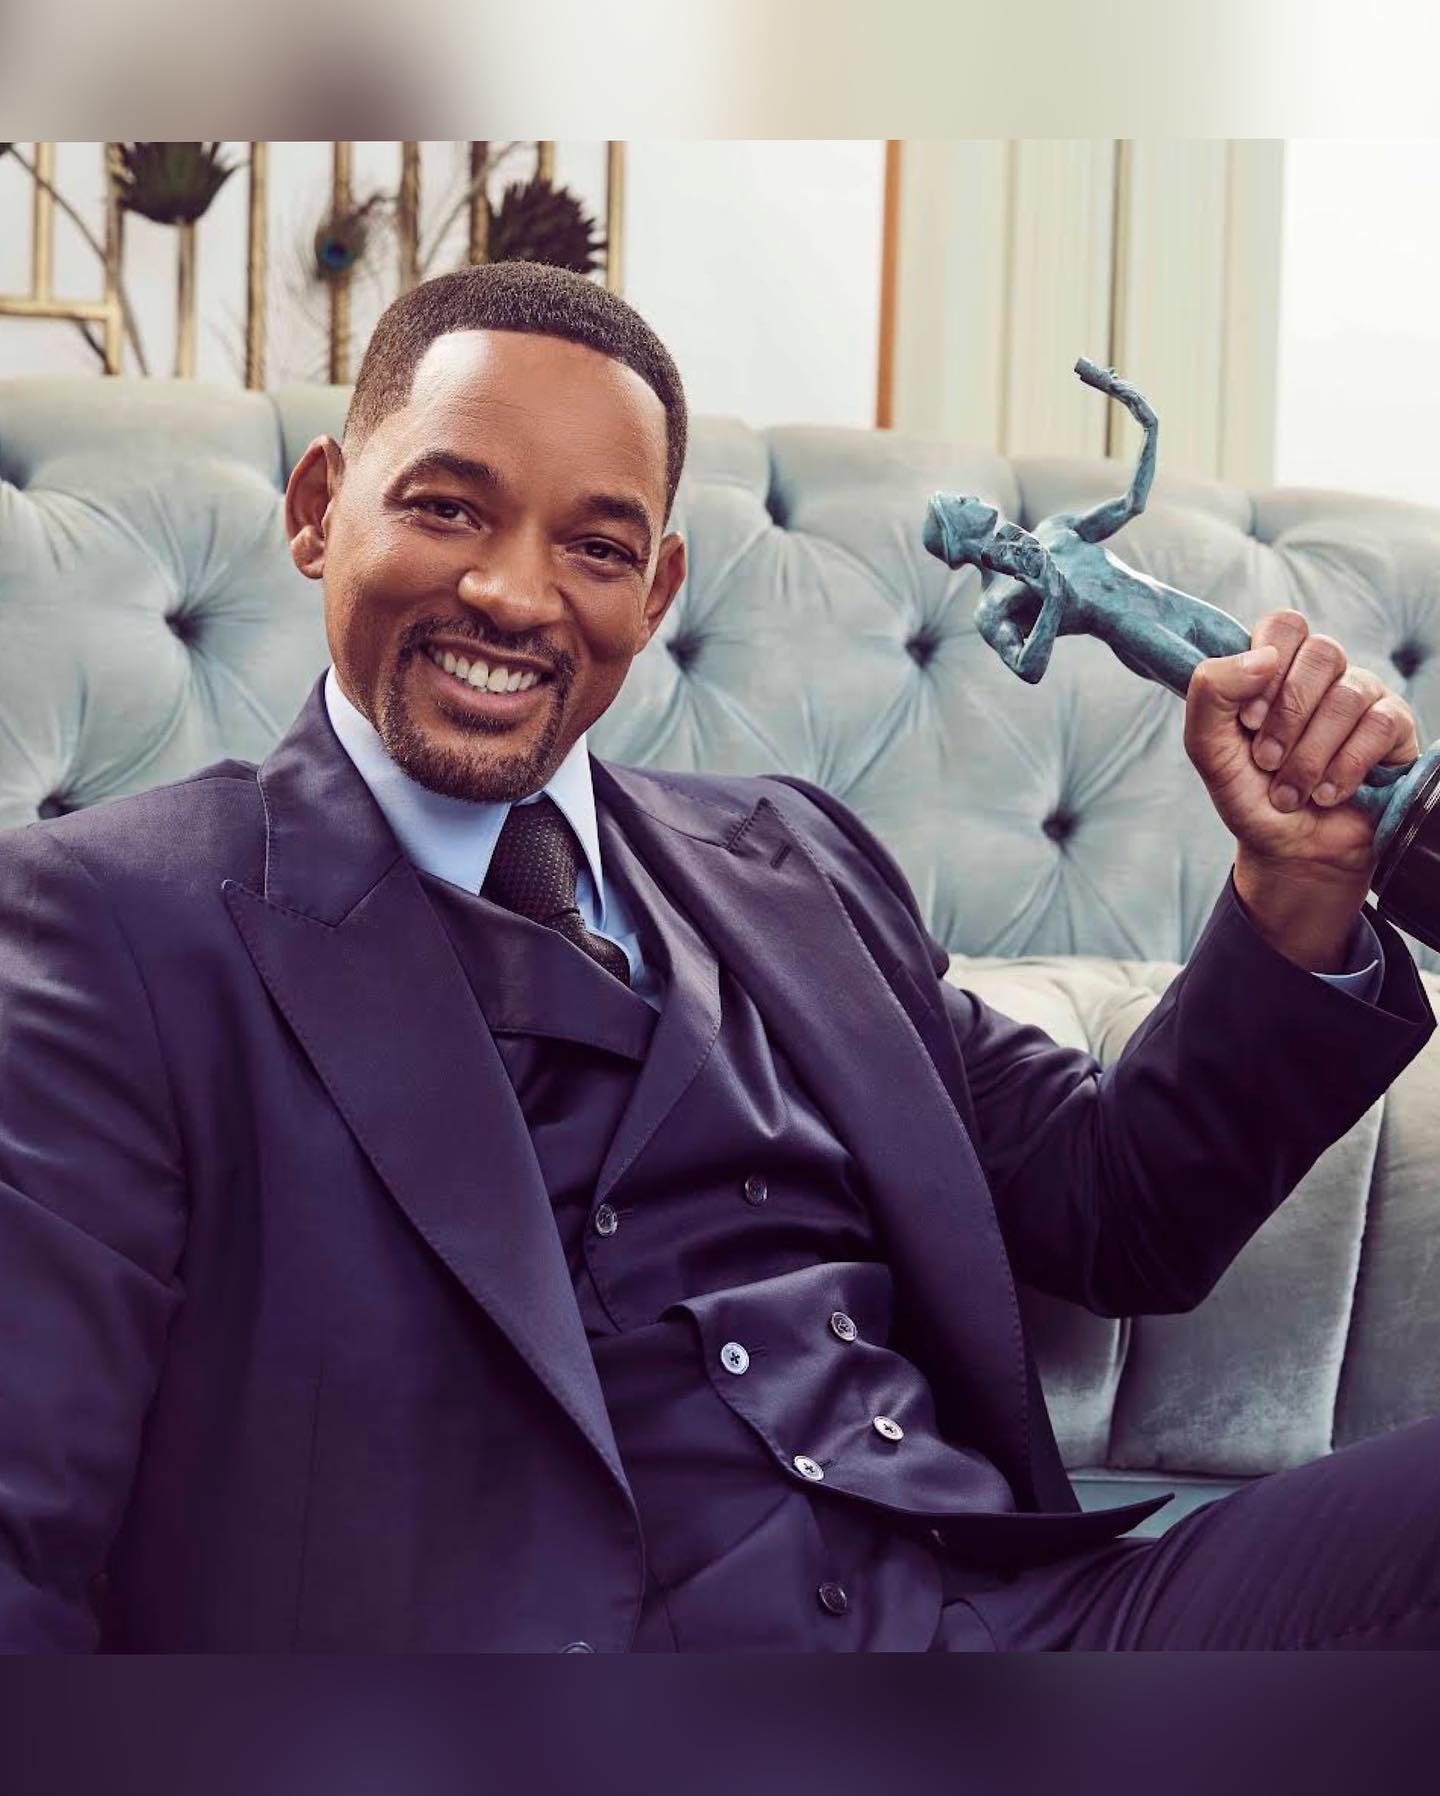 Photo shared by Will Smith on February 28 2022 tagging @iheartmaarten @sagawards @tbsnetwork @tntdrama and @shutterstocknow